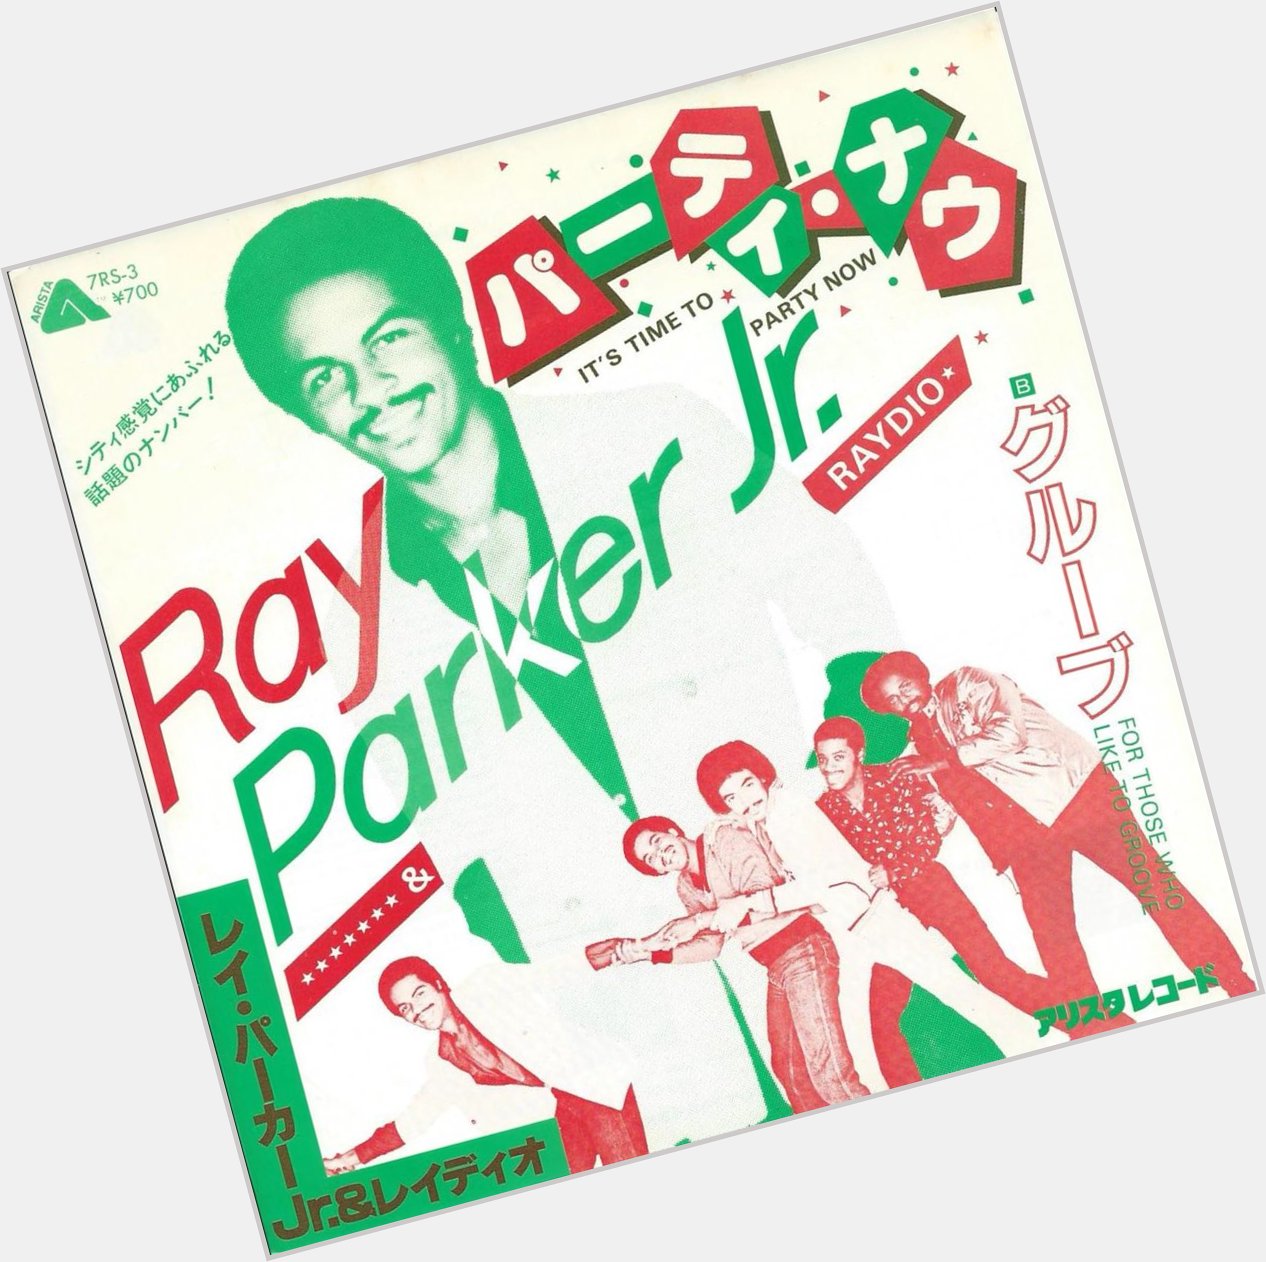   It\s Time To Party Now / Ray Parker Jr. & Raydio
Happy Birthday,Ray!! 